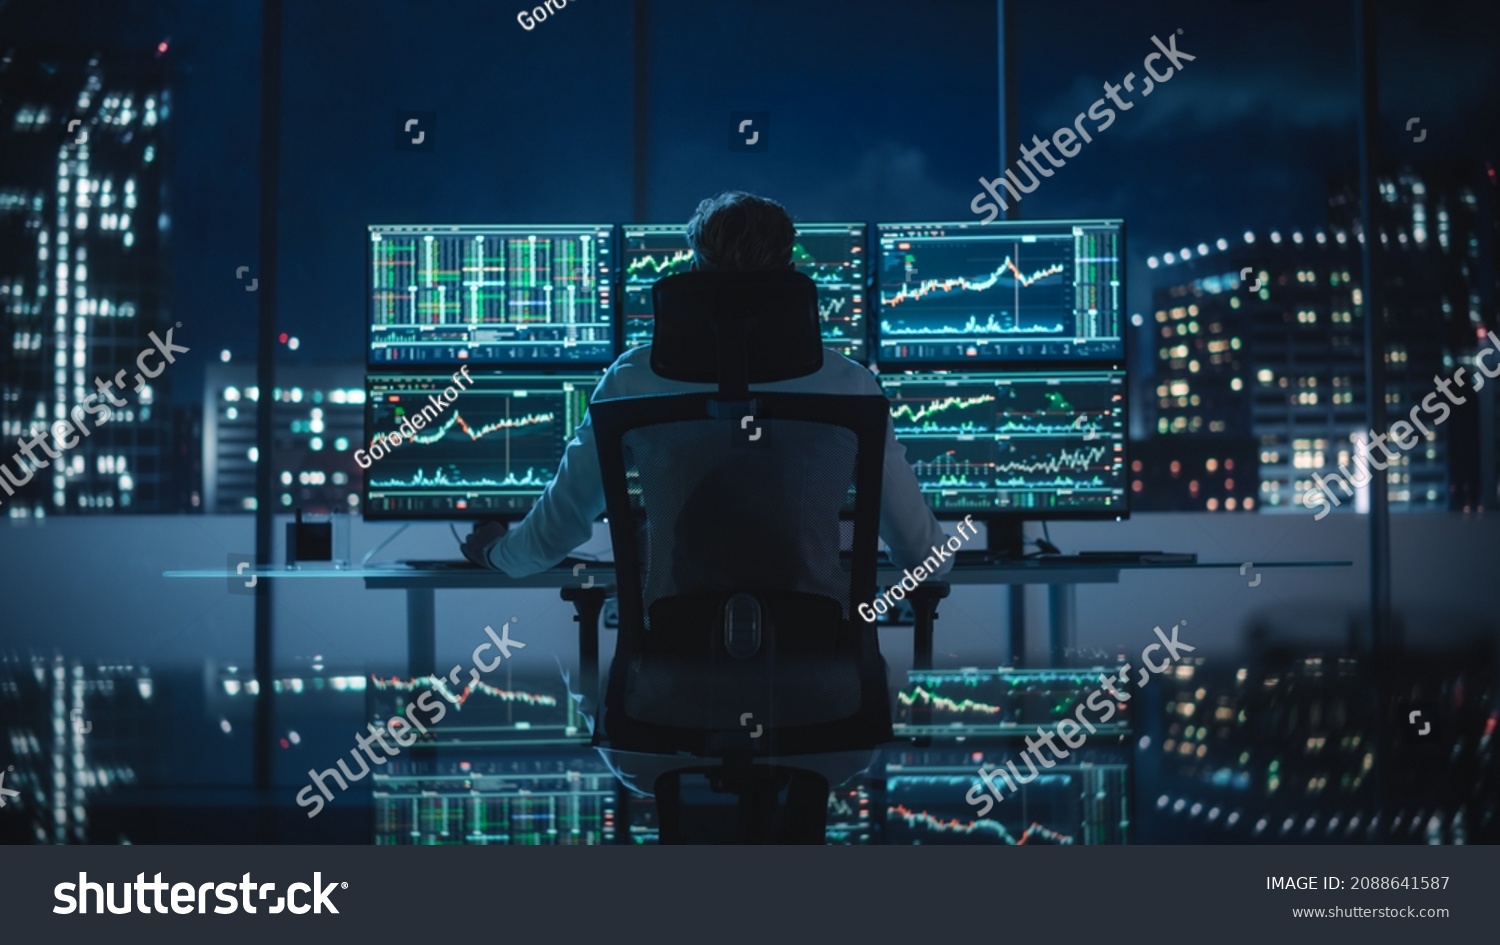 Financial Analyst Working on Computer with Multi-Monitor Workstation with Real-Time Stocks, Commodities and Exchange Market Charts. Businessman Deliberating on Next Investment Trade in a Bank Office. #2088641587